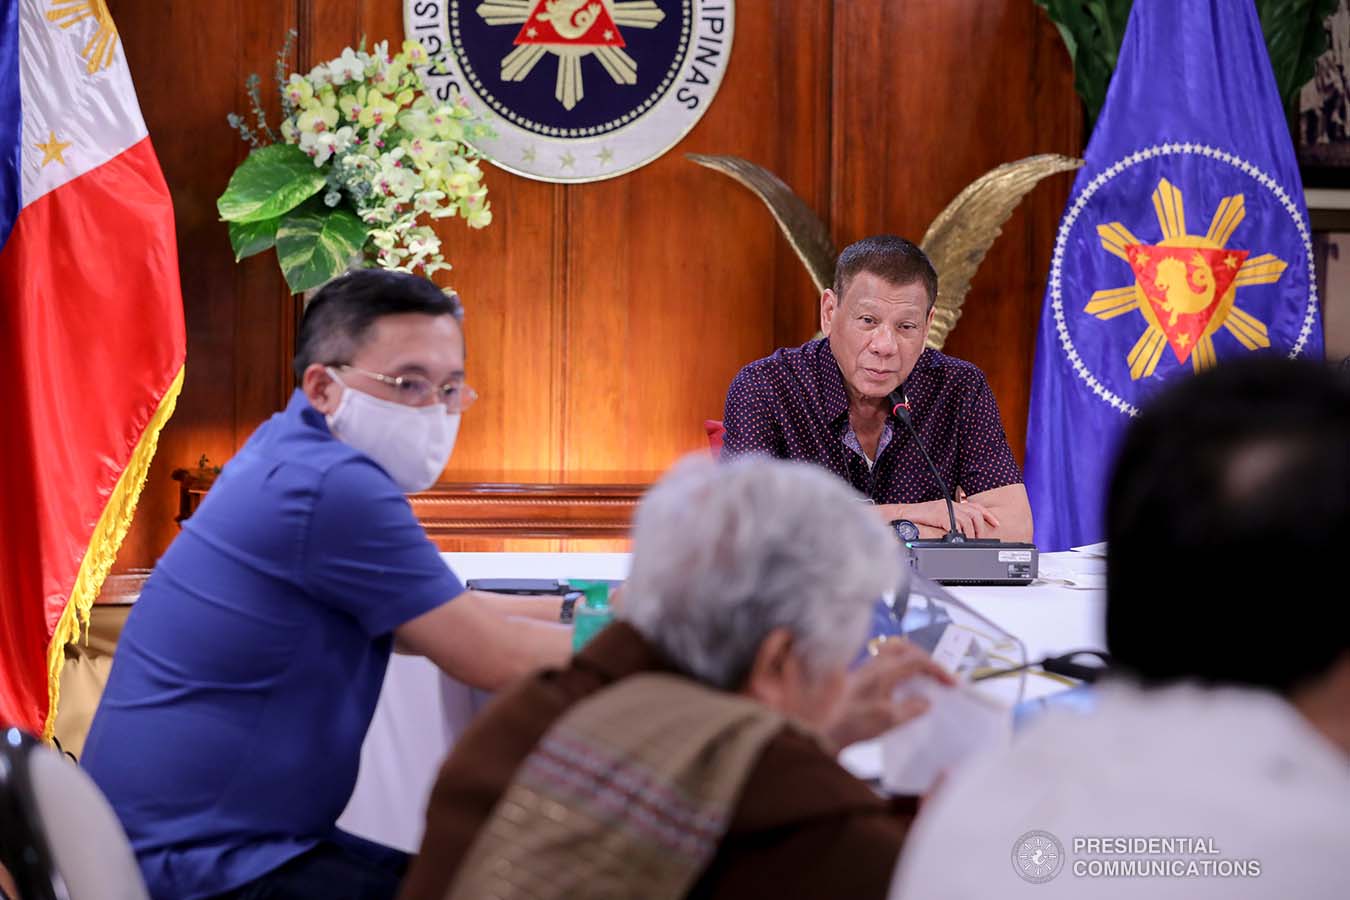 President Rodrigo Roa Duterte talks to the people after holding a meeting with the Inter-Agency Task Force on the Emerging Infectious Diseases (IATF-EID) core members at the Malago Clubhouse in Malacañang on July 21, 2020. ROBINSON NIÑAL JR./PRESIDENTIAL PHOTO